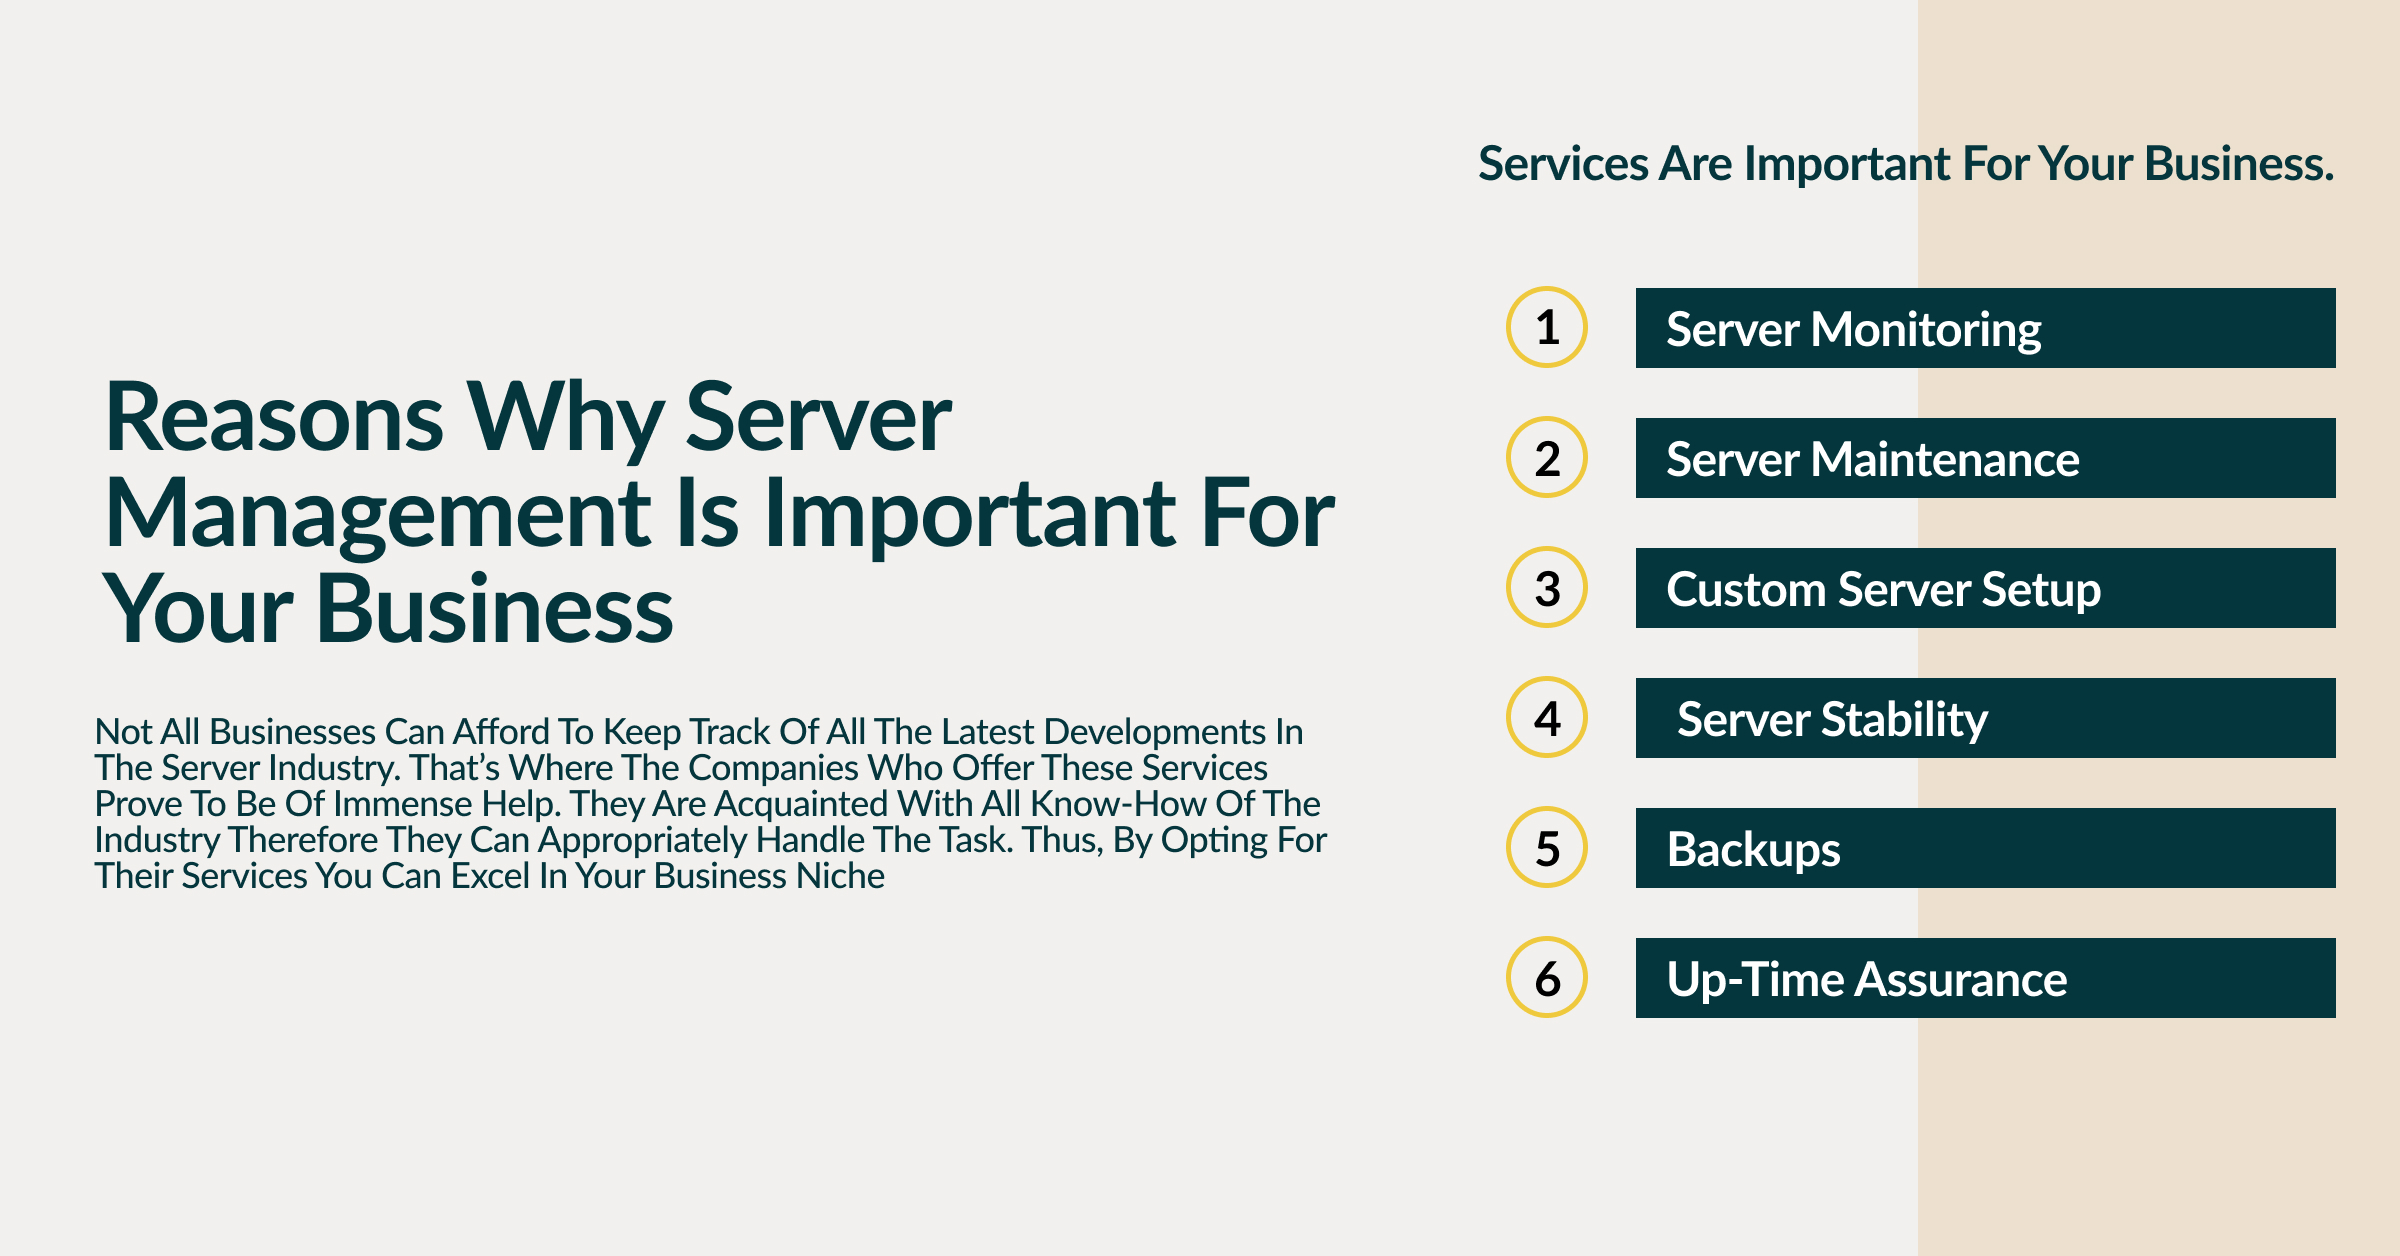 Reasons why Server Management is important for your Business